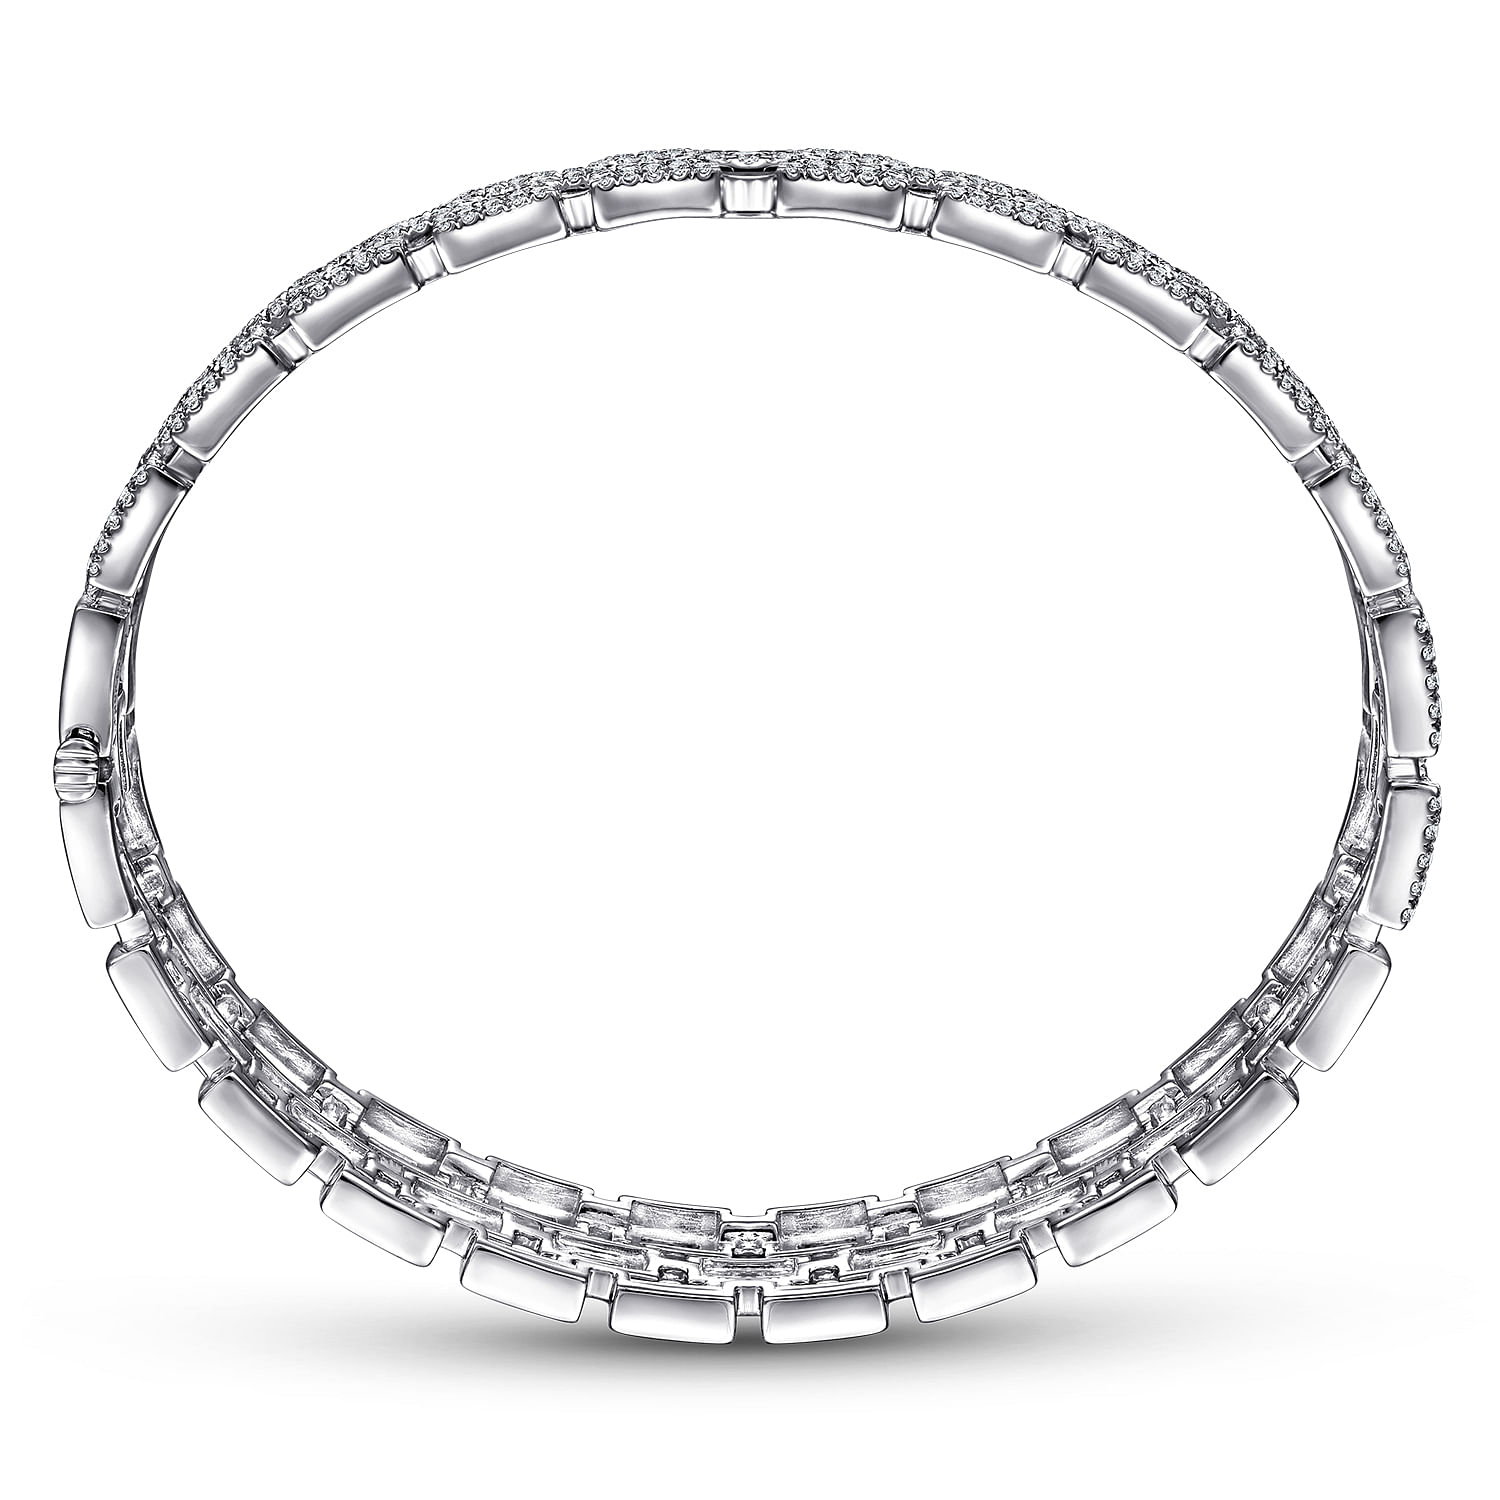 Wide 18K White Gold Round and Baguette Diamond Bracelet